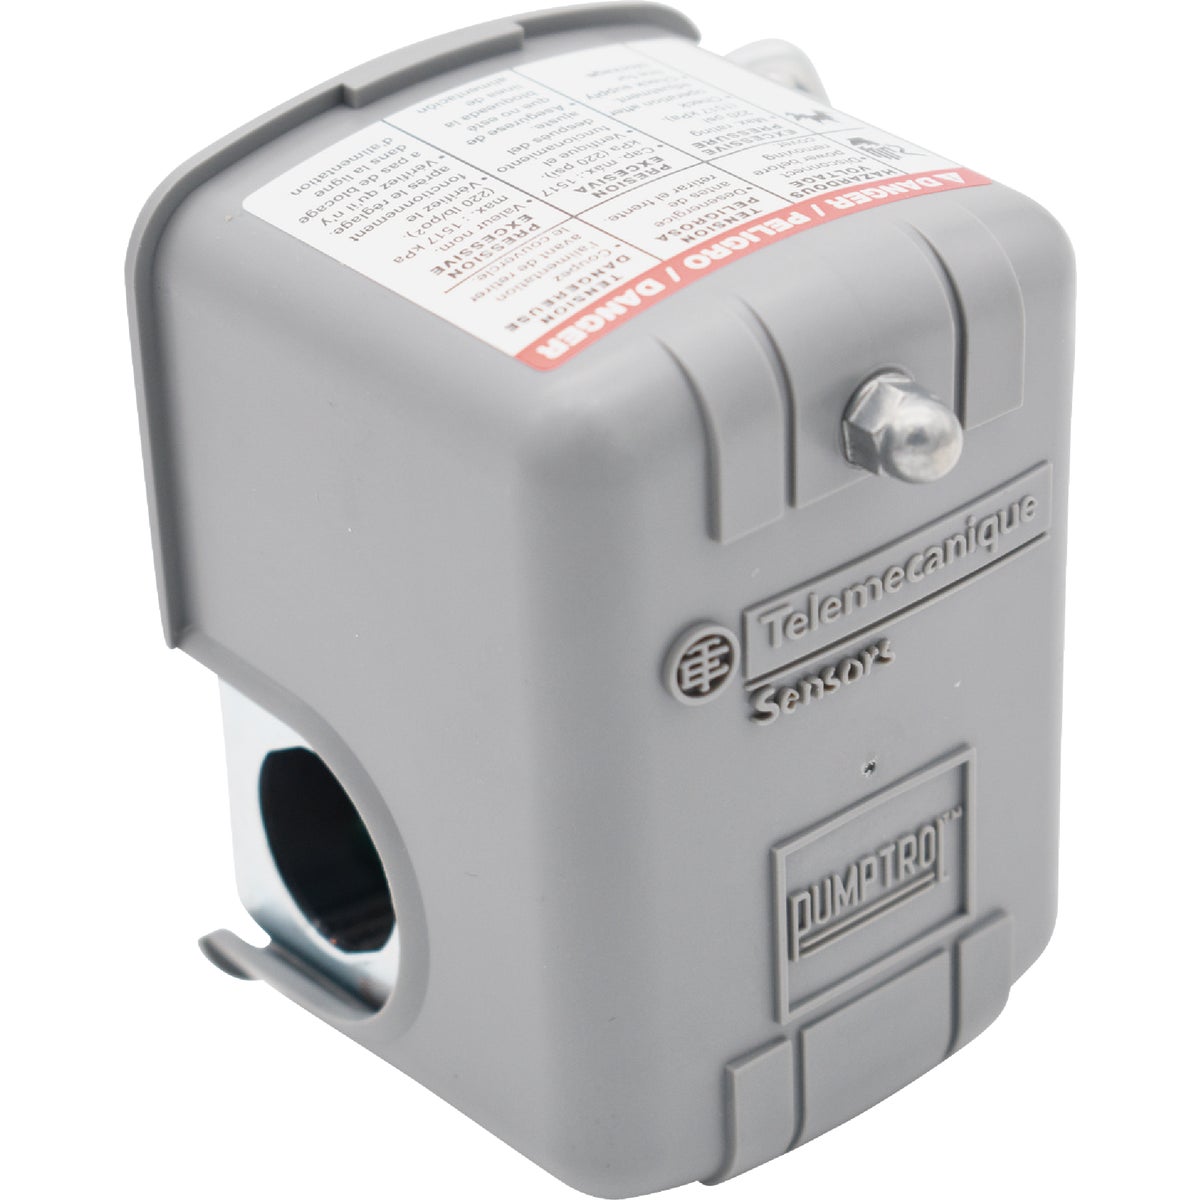 Item 416010, Features low water cut-off switch to shut off pump at 12 P.S.I.